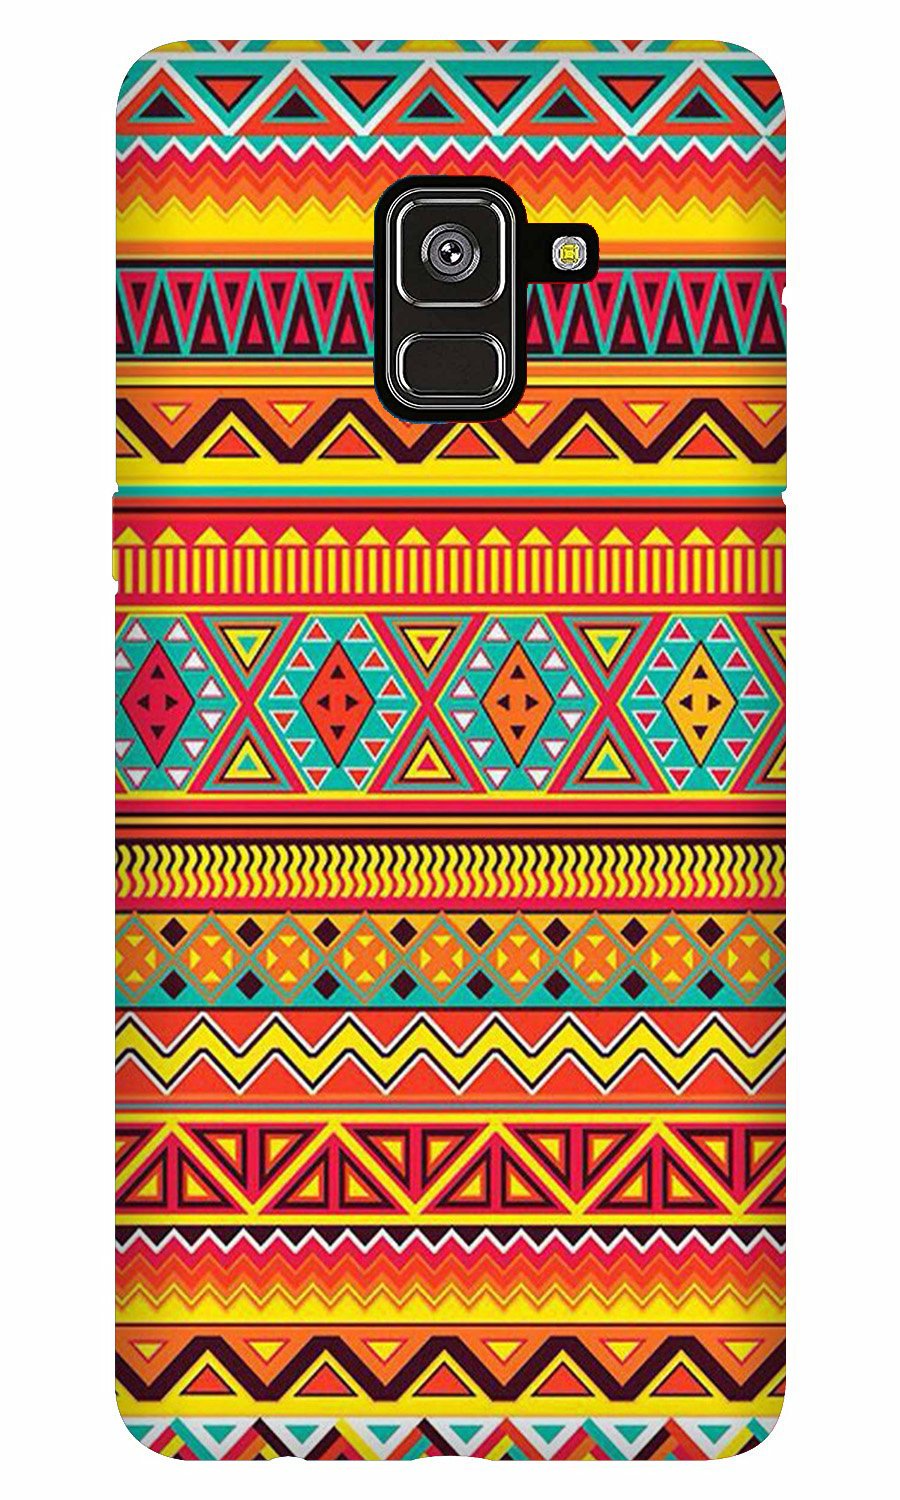 Zigzag line pattern Case for Galaxy A5 (2018)